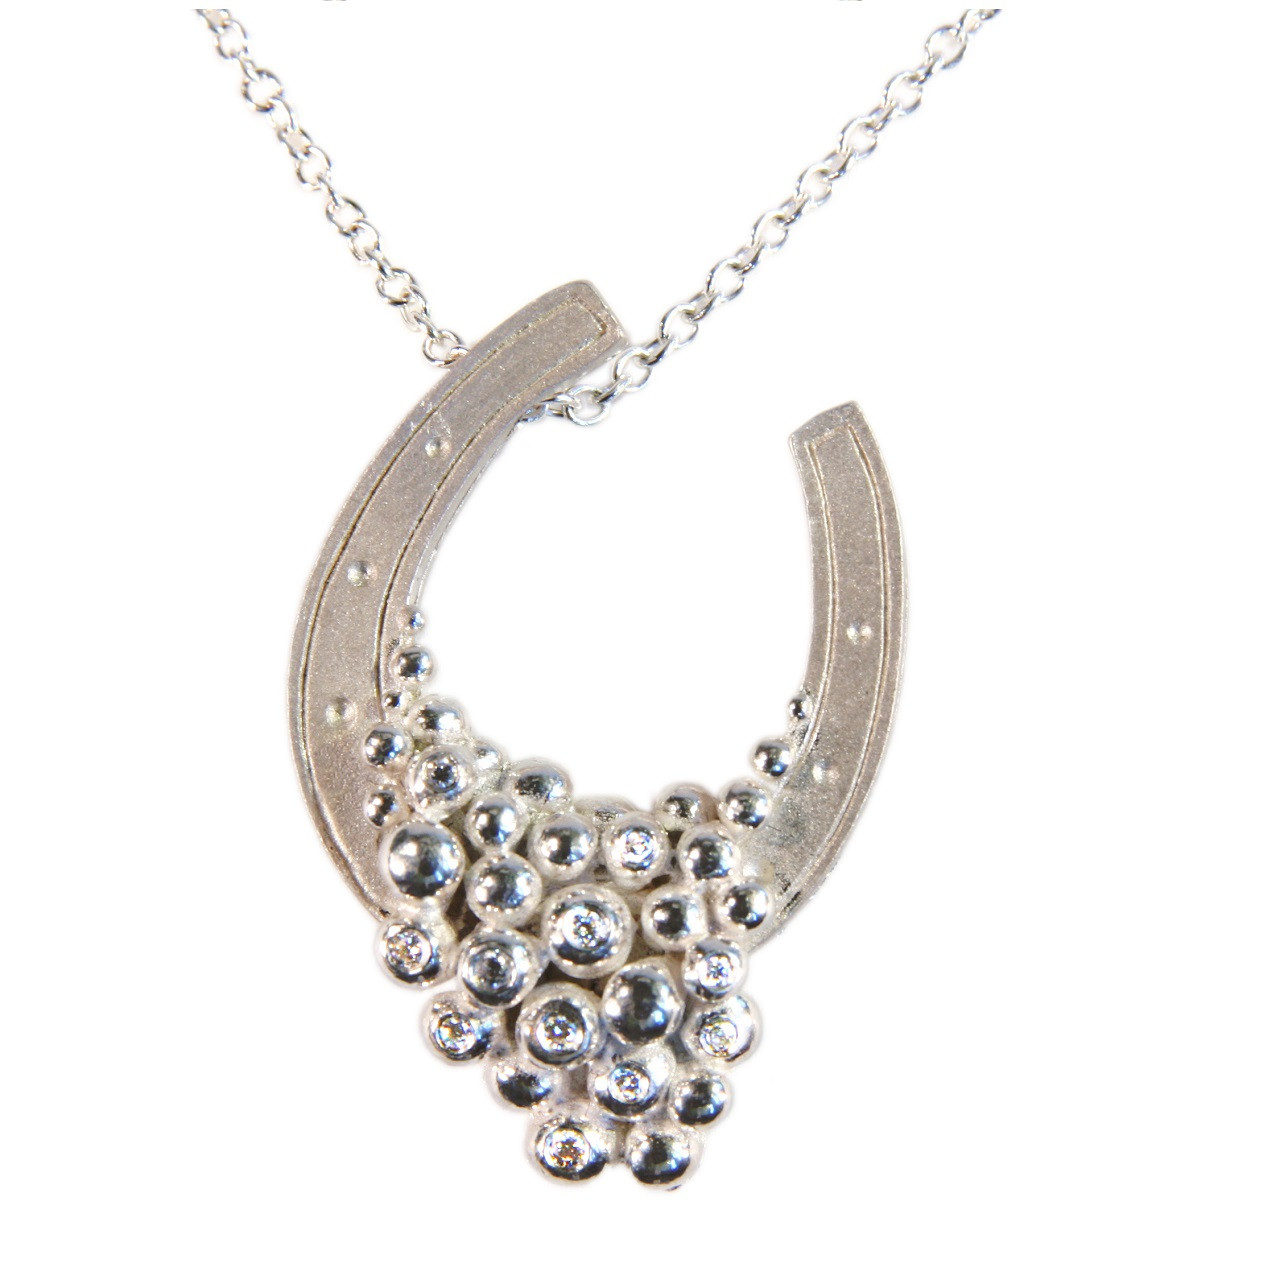 Silver & Cubic Zirconia Lucky Horseshoe Necklace - Cavendish French